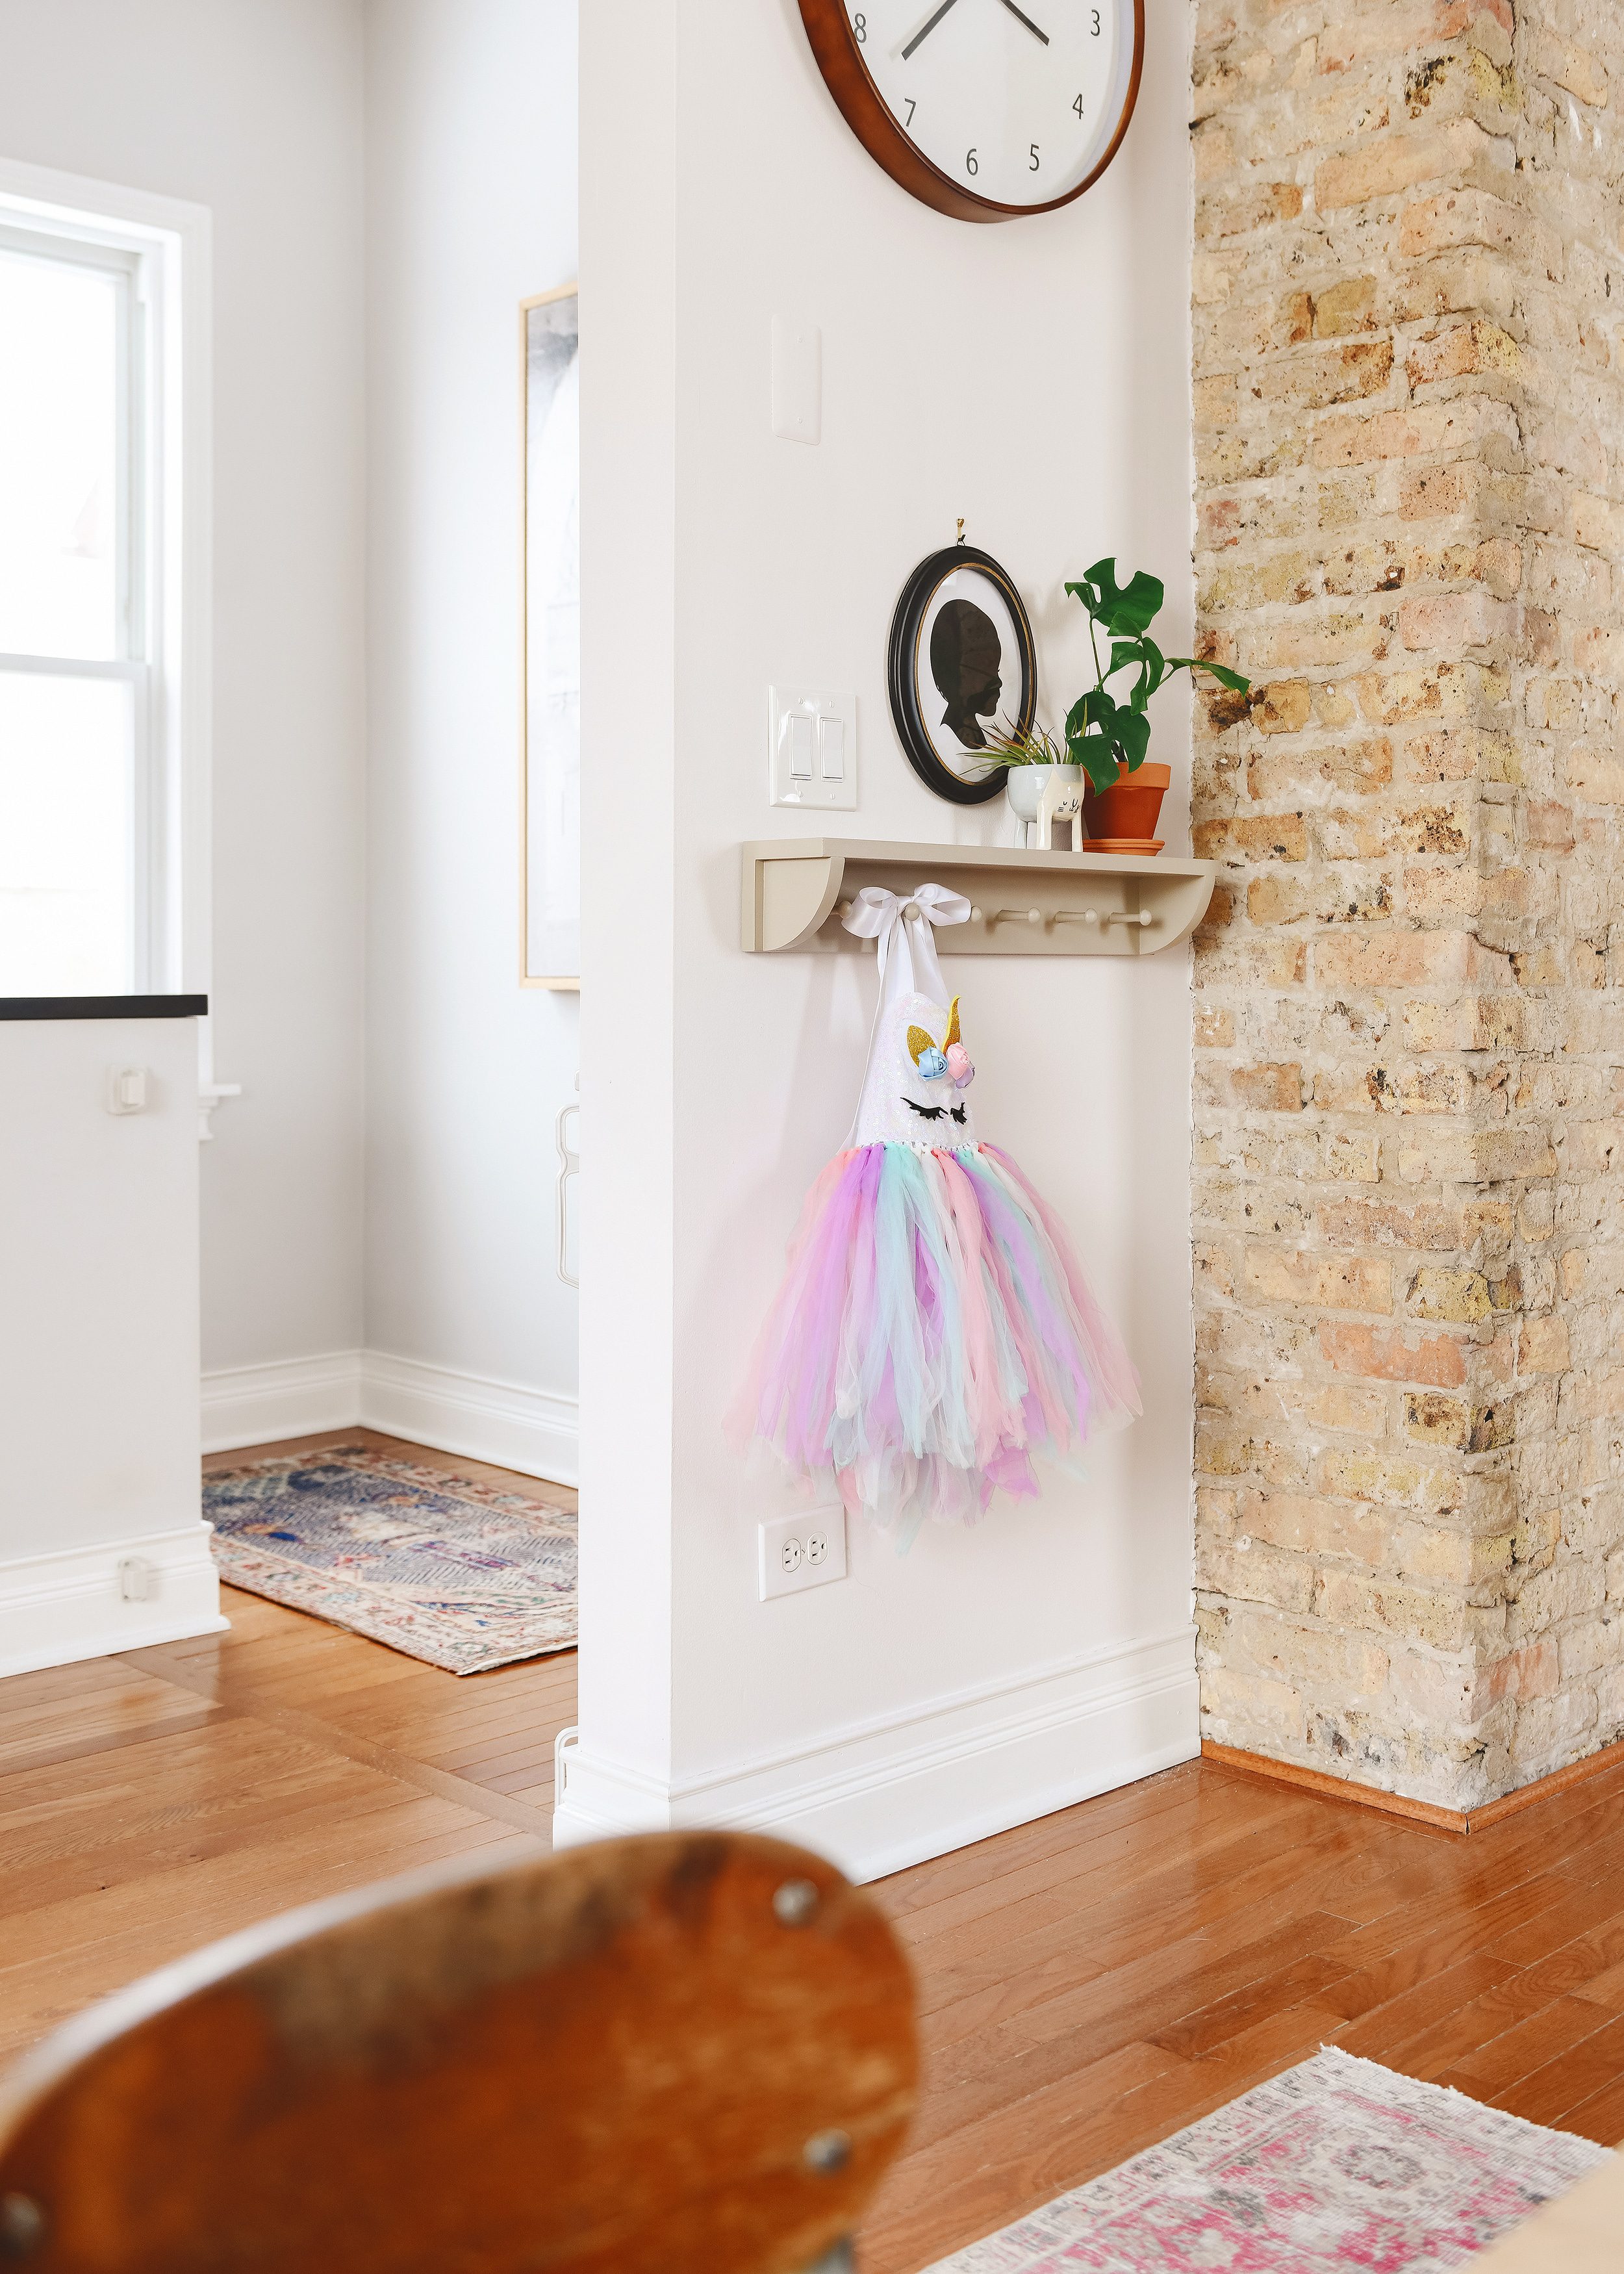 Our DIY peg rail installed as Lucy's dress-up station // via Yellow Brick Home